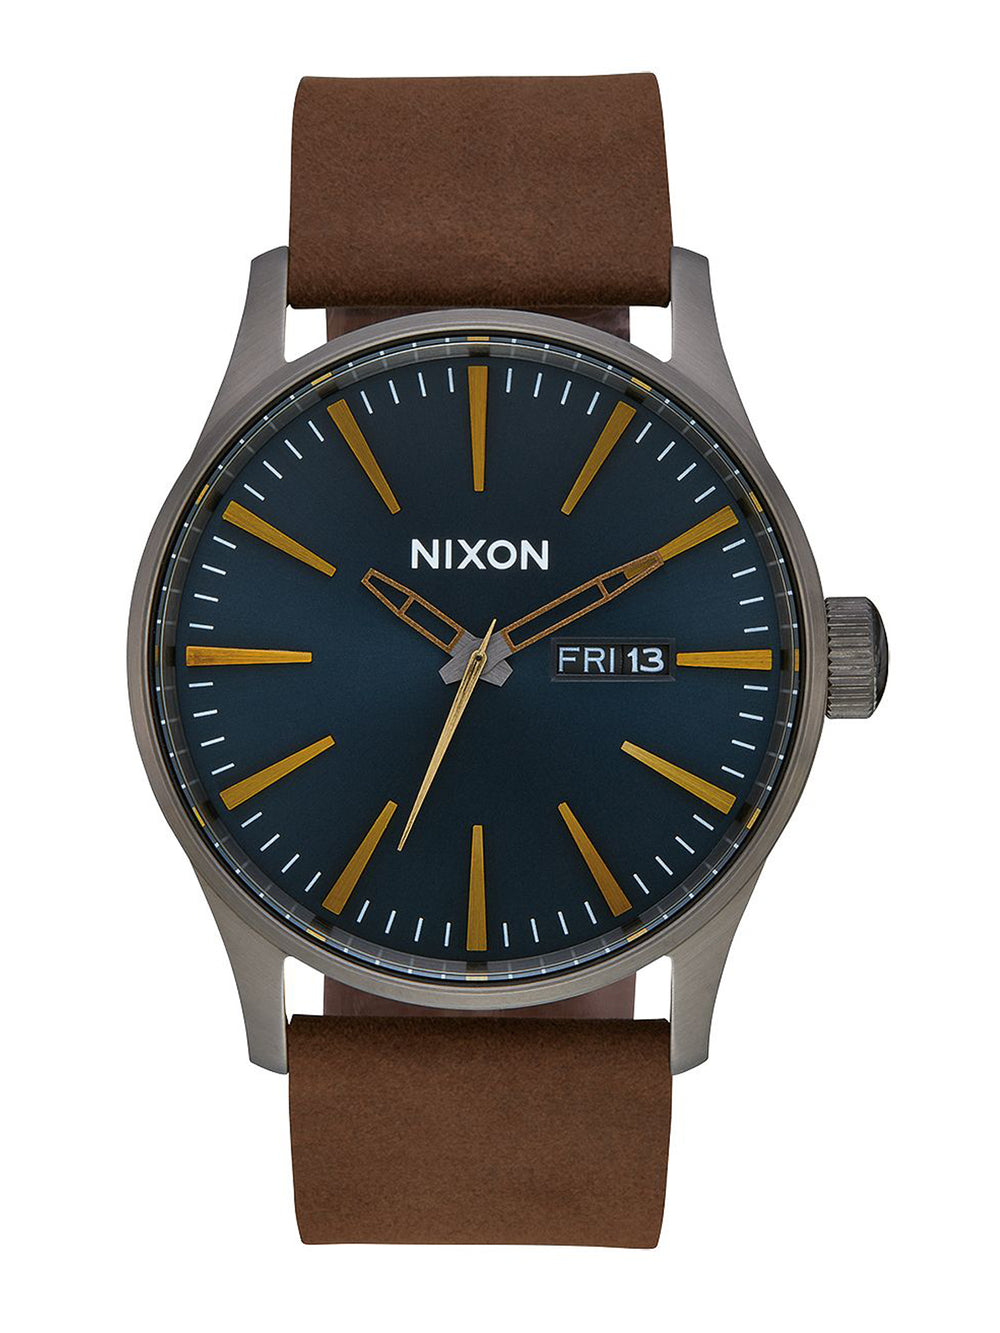 NIXON SENTRY LEATHER WATCH - CLEARANCE